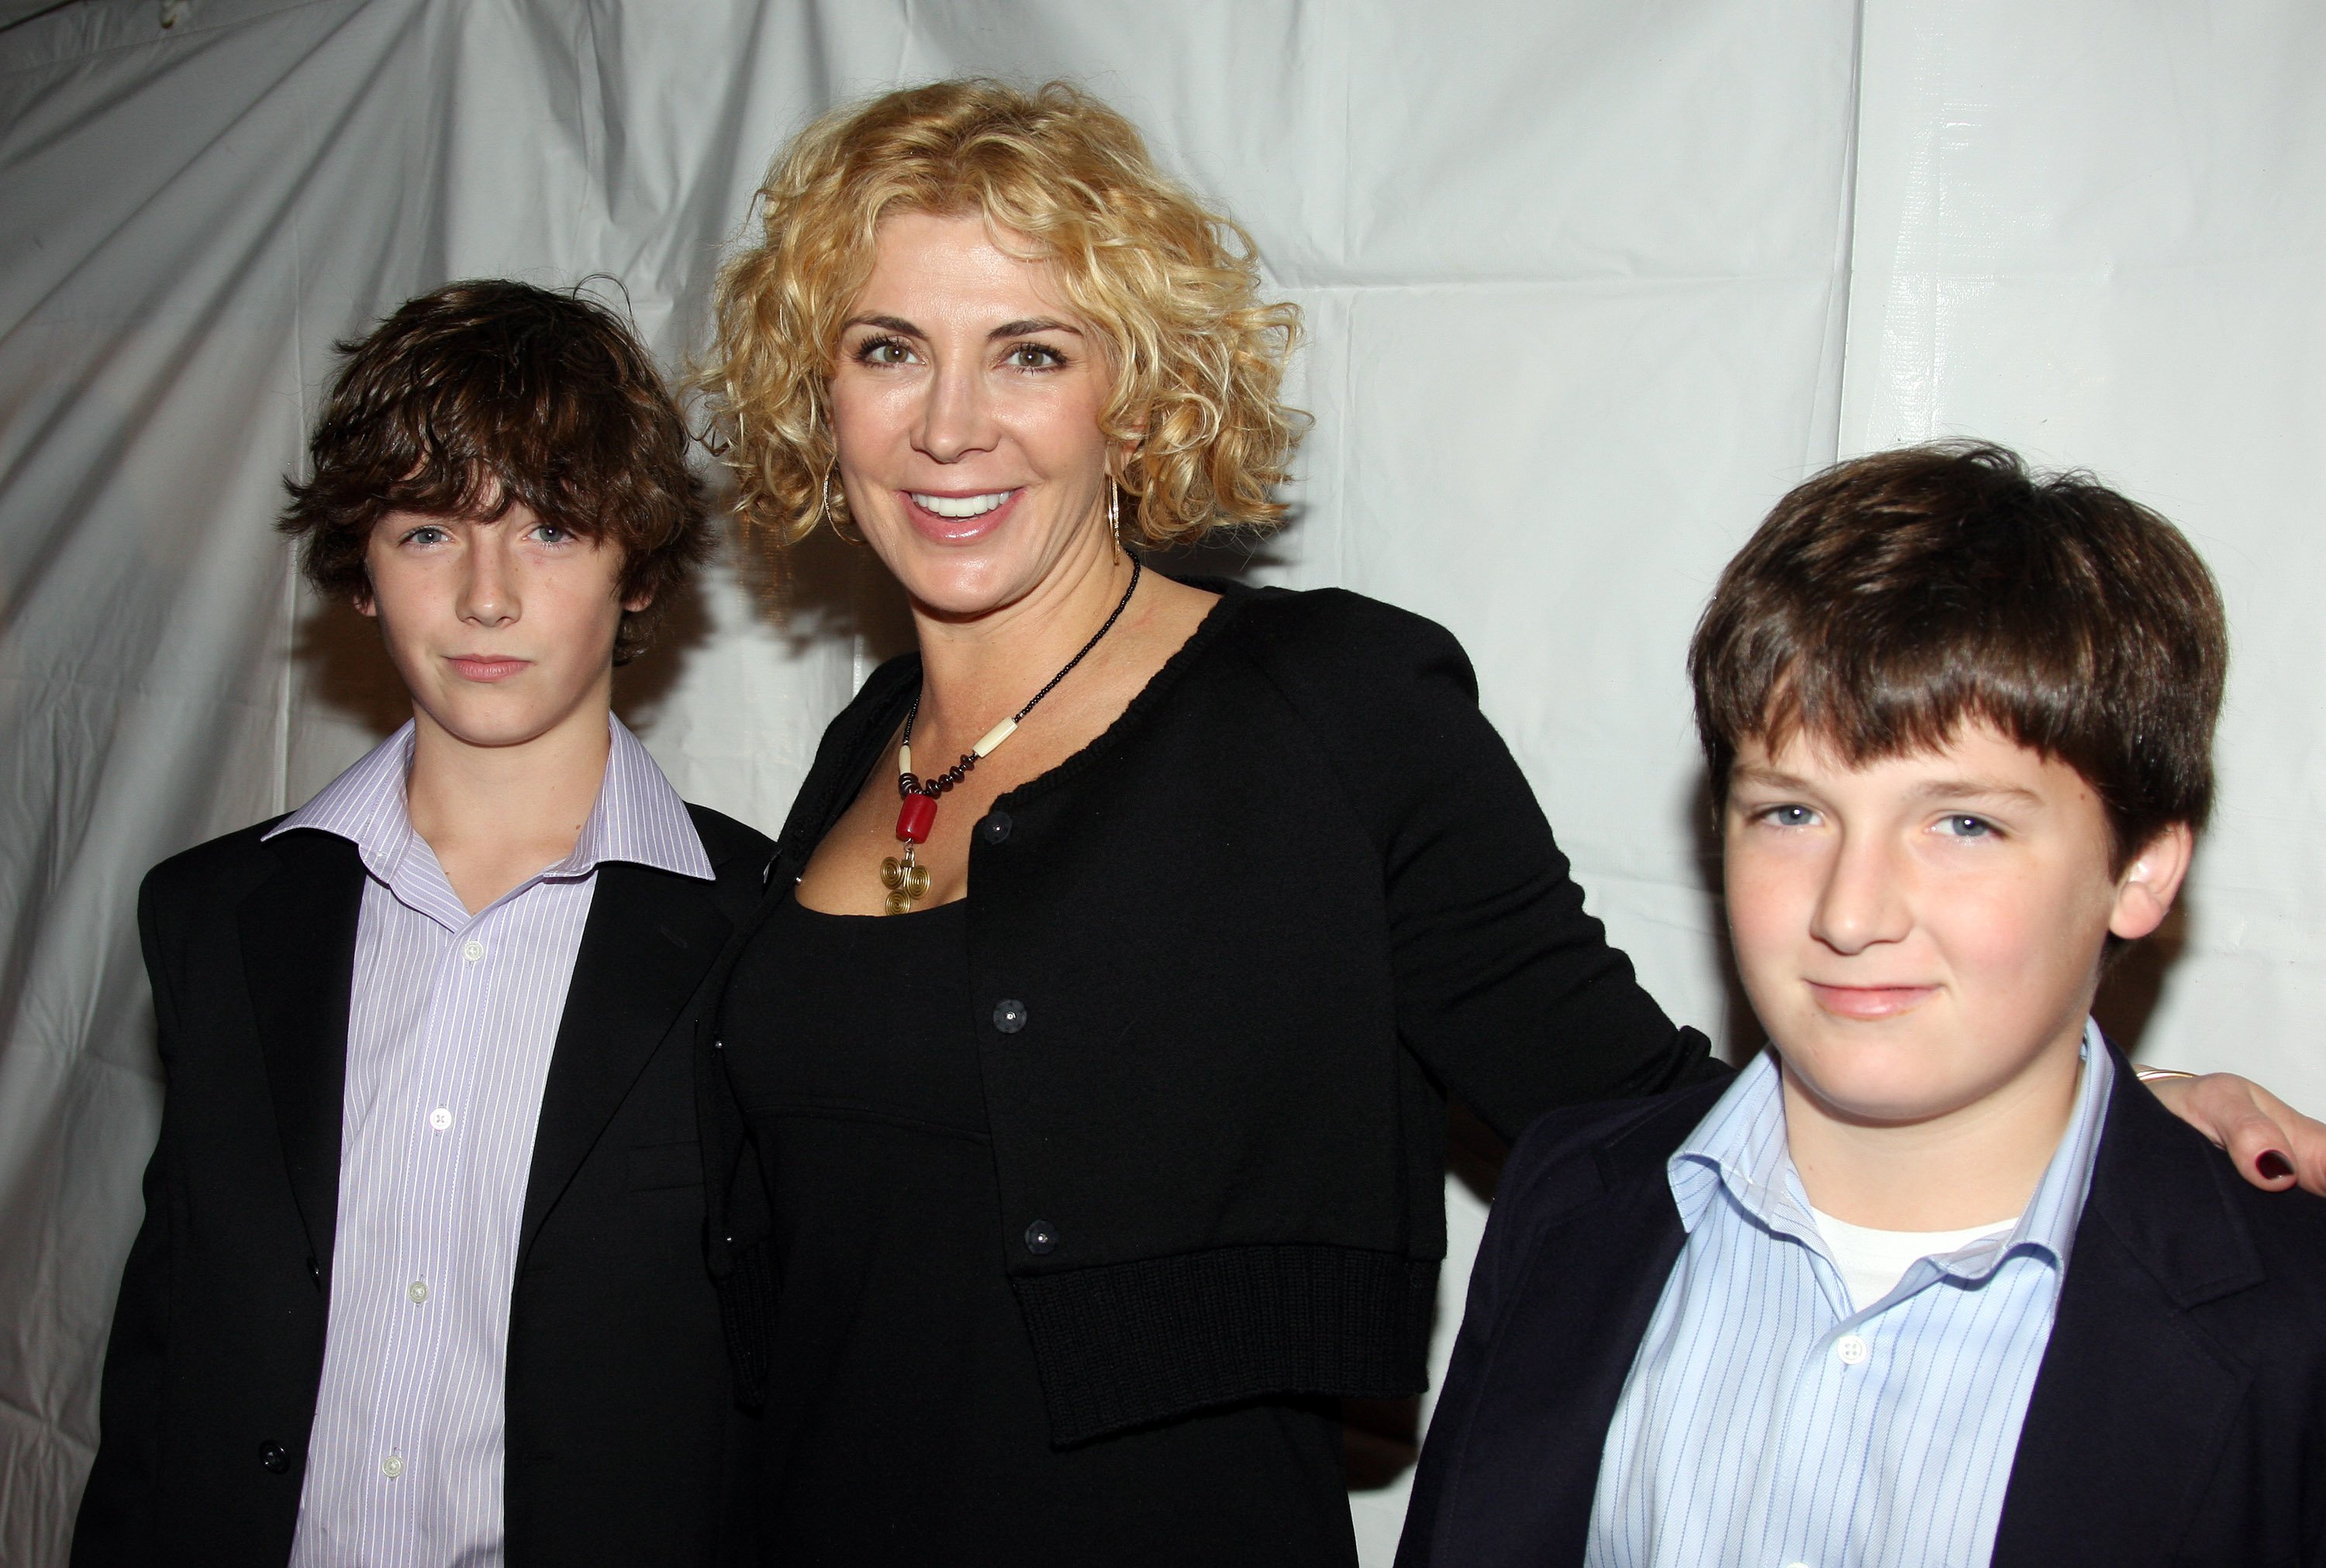 Natasha Richardson pictured with her sons Micheal Neeson (L) and Daniel Neeson (R) during the "Billy Elliot The Musical" opening night on Broadway at the Imperial Theatre on November 13, 2008 in New York City. / Source: Getty Images